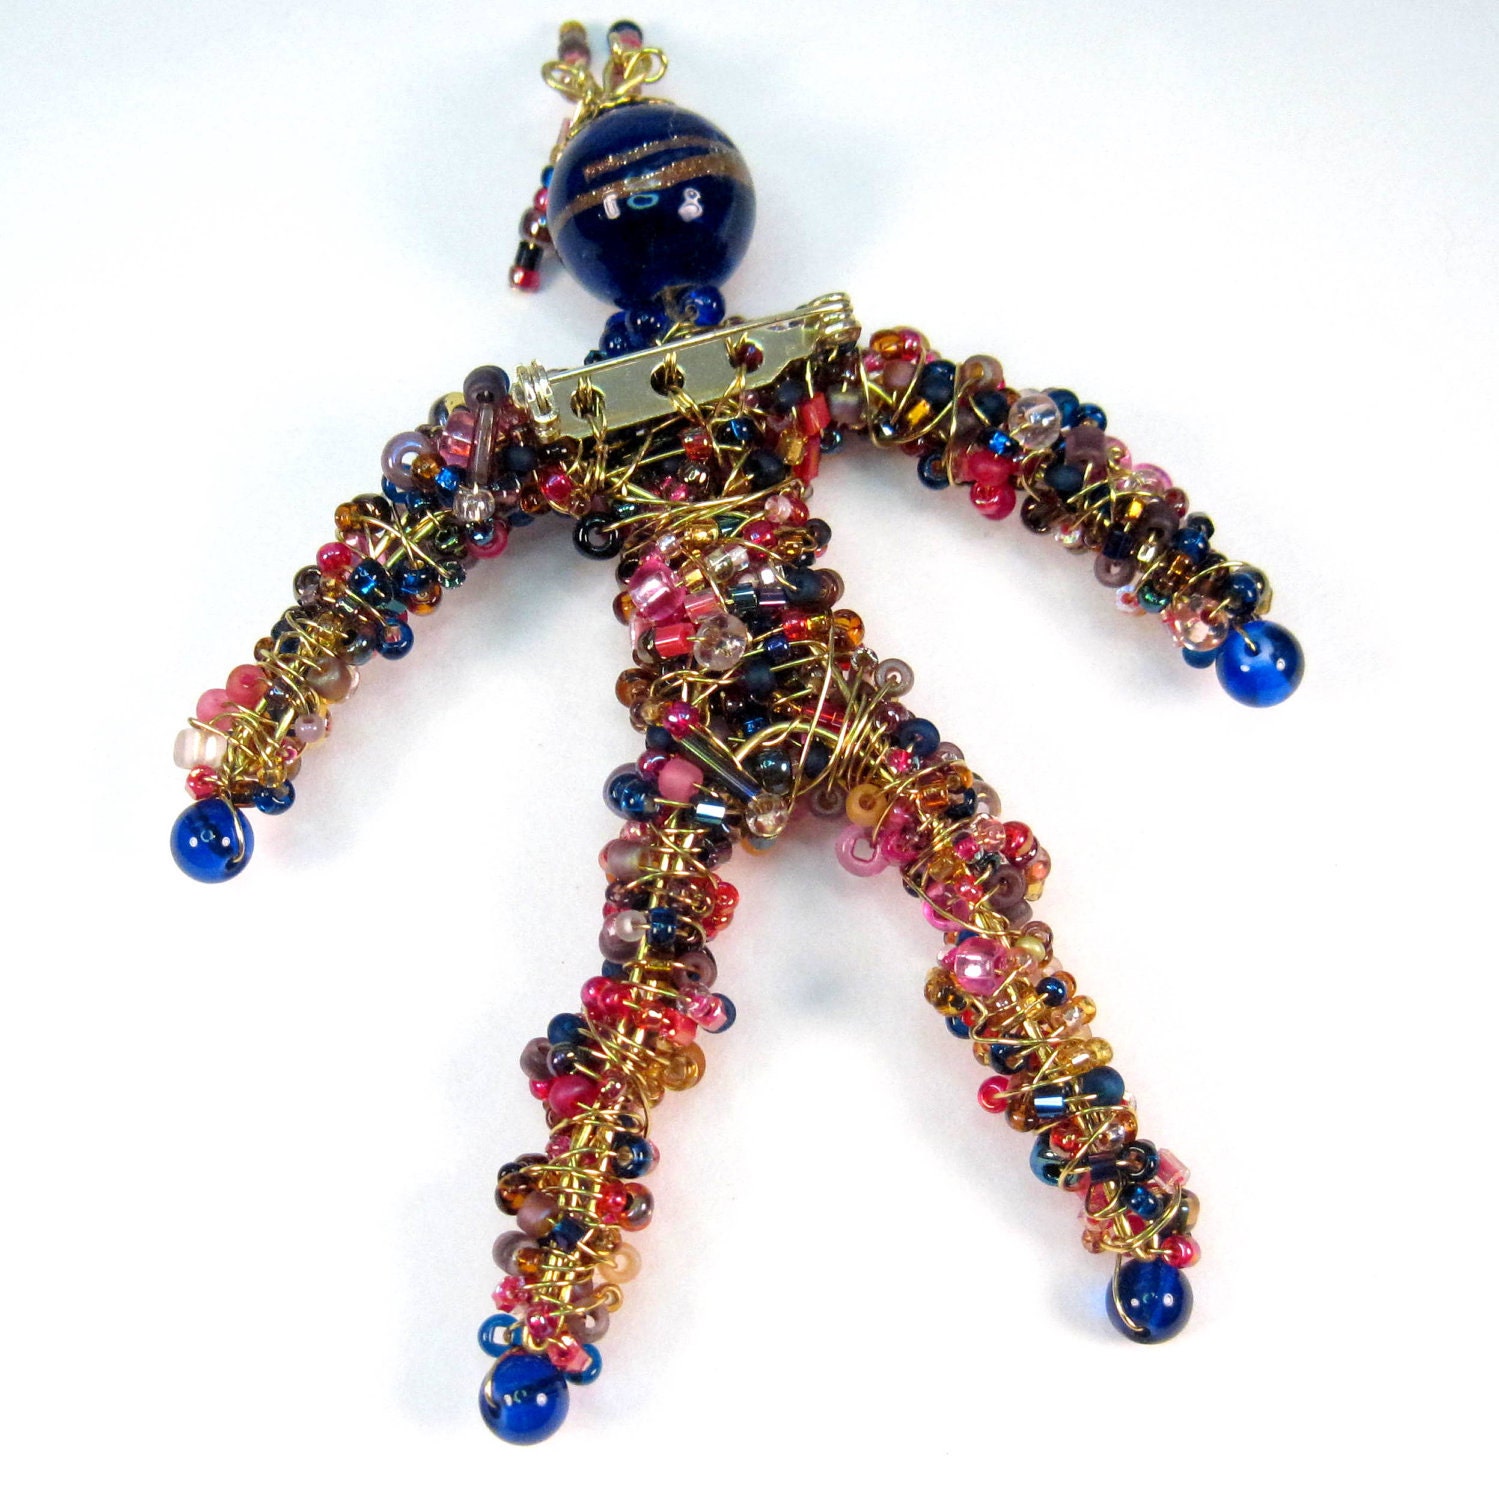 Beaded People Pin Bead People Wire Wrapped By Playnwithbeads